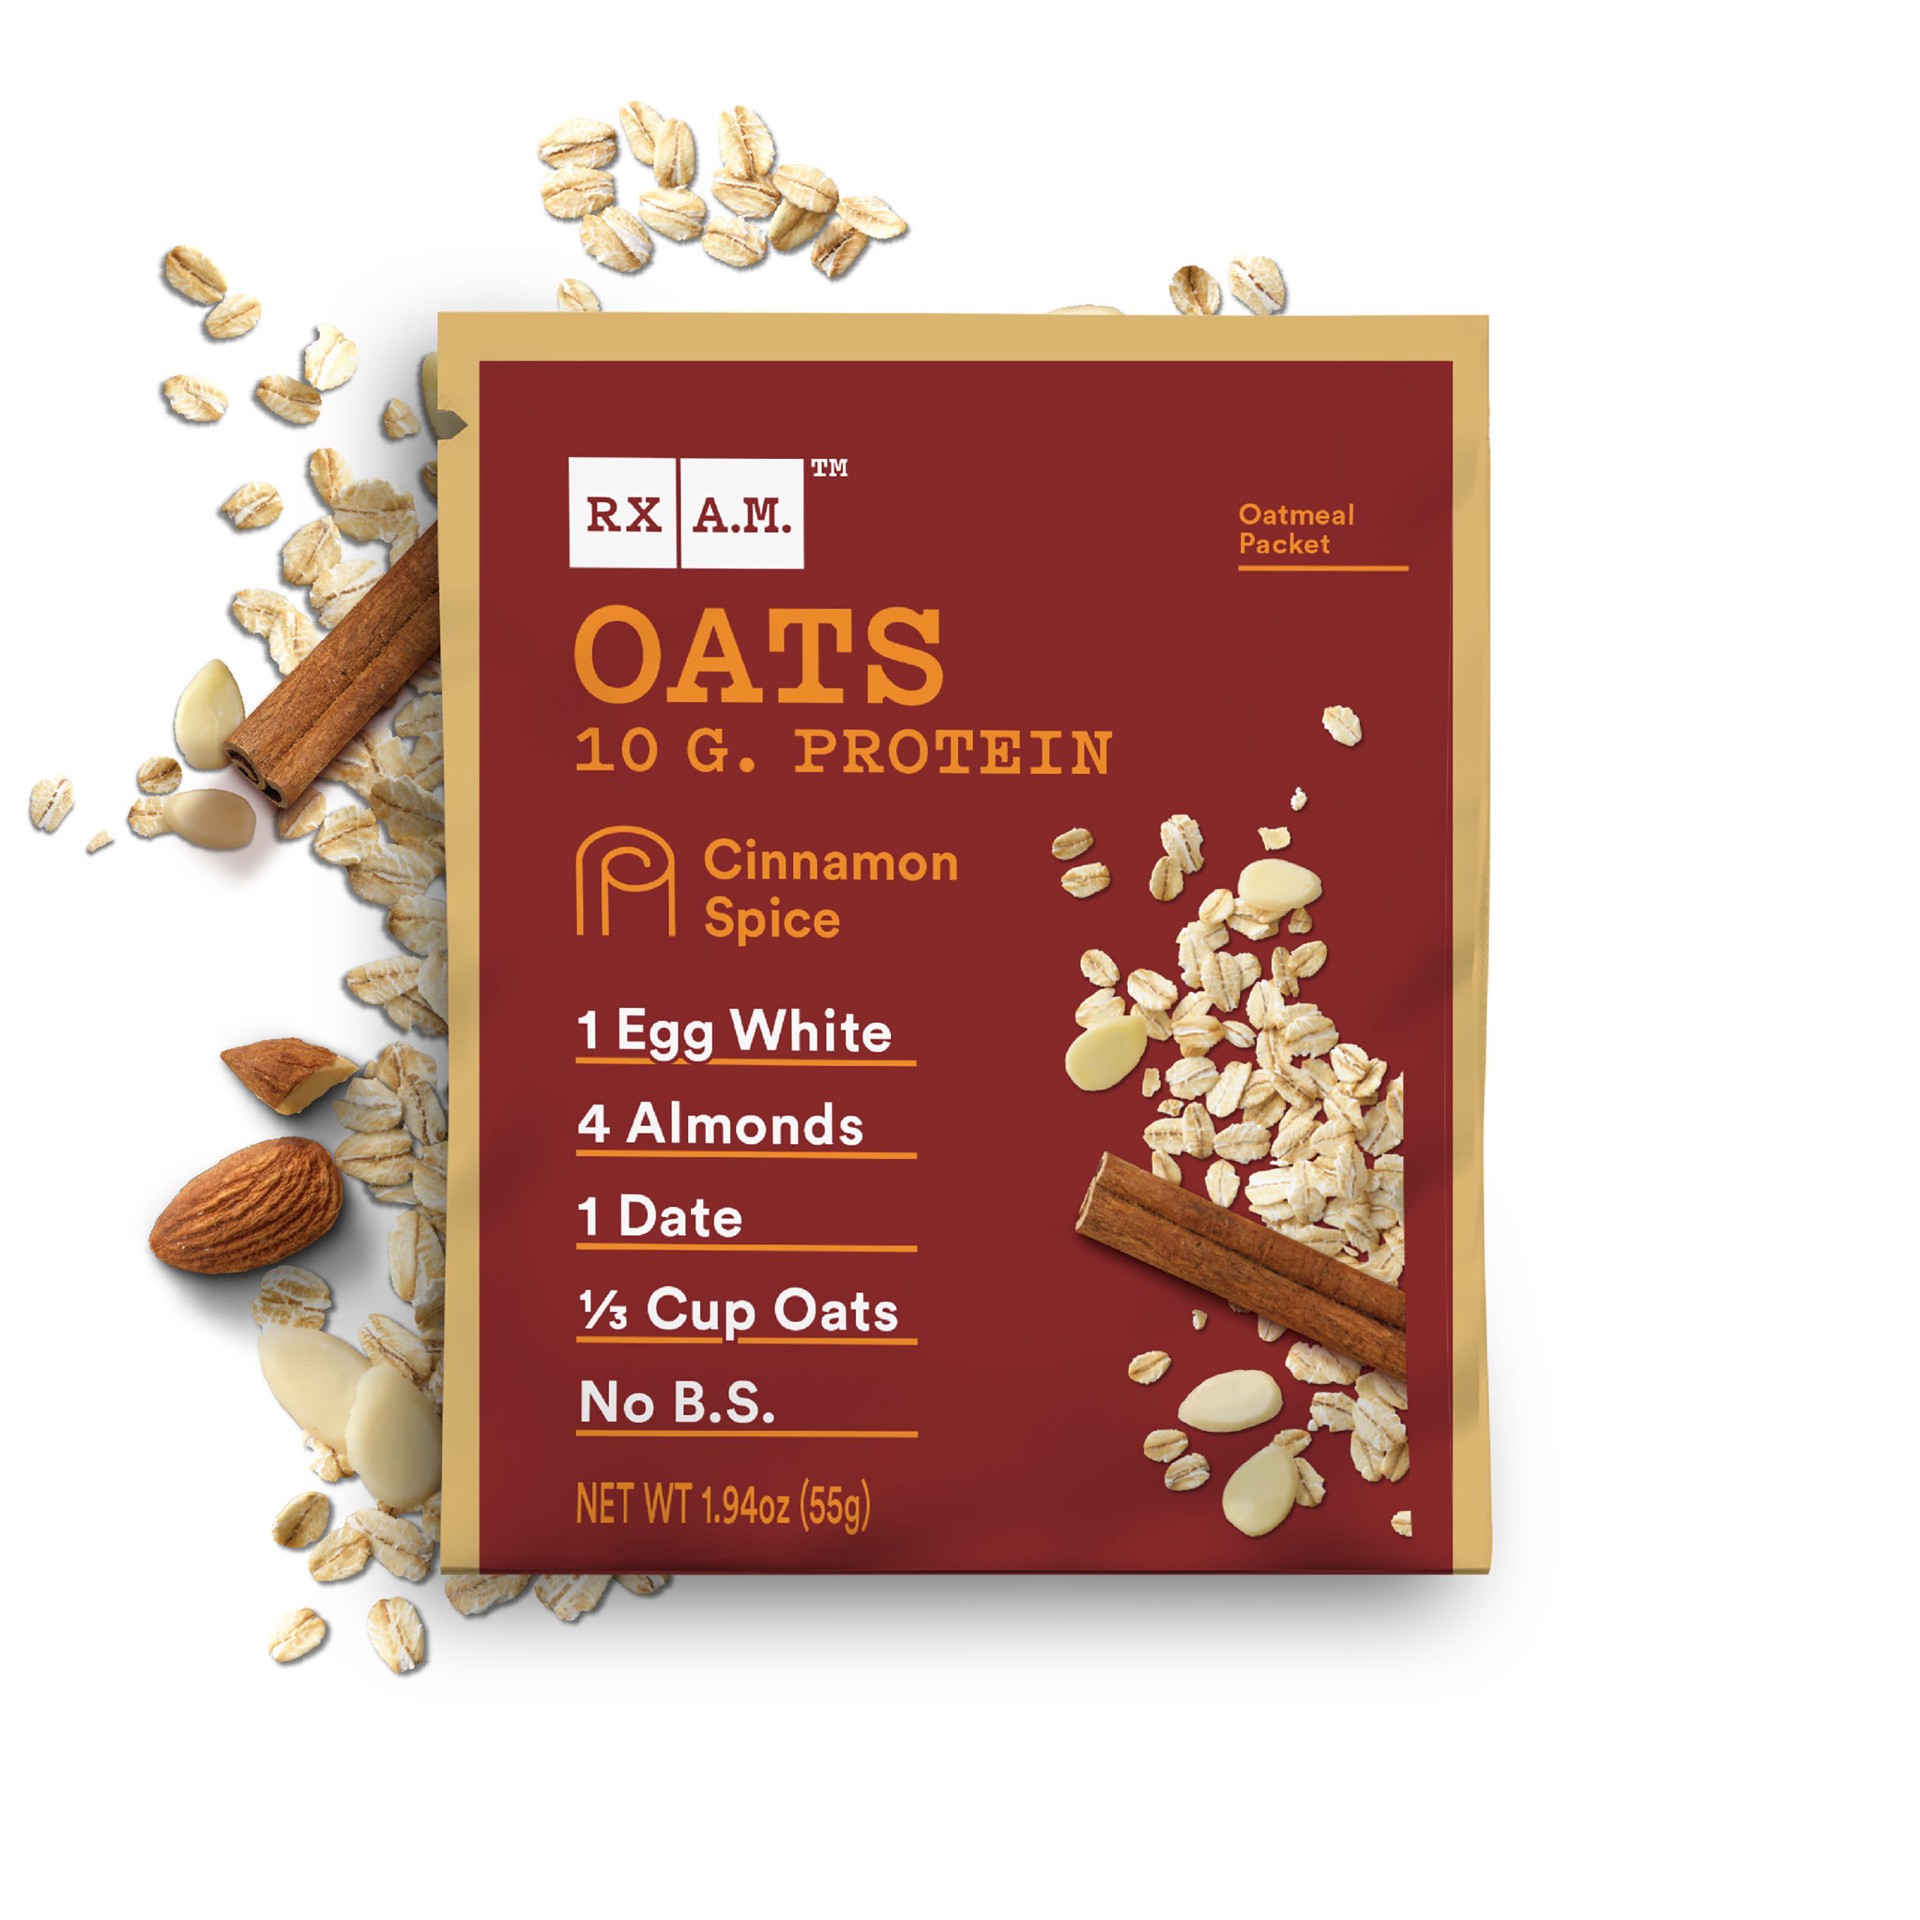 slide 1 of 4, RX A.M. Oats Oatmeal Packet, Cinnamon Spice, 10g Protein, 9.7oz Box, 5 Count, 9.7 oz